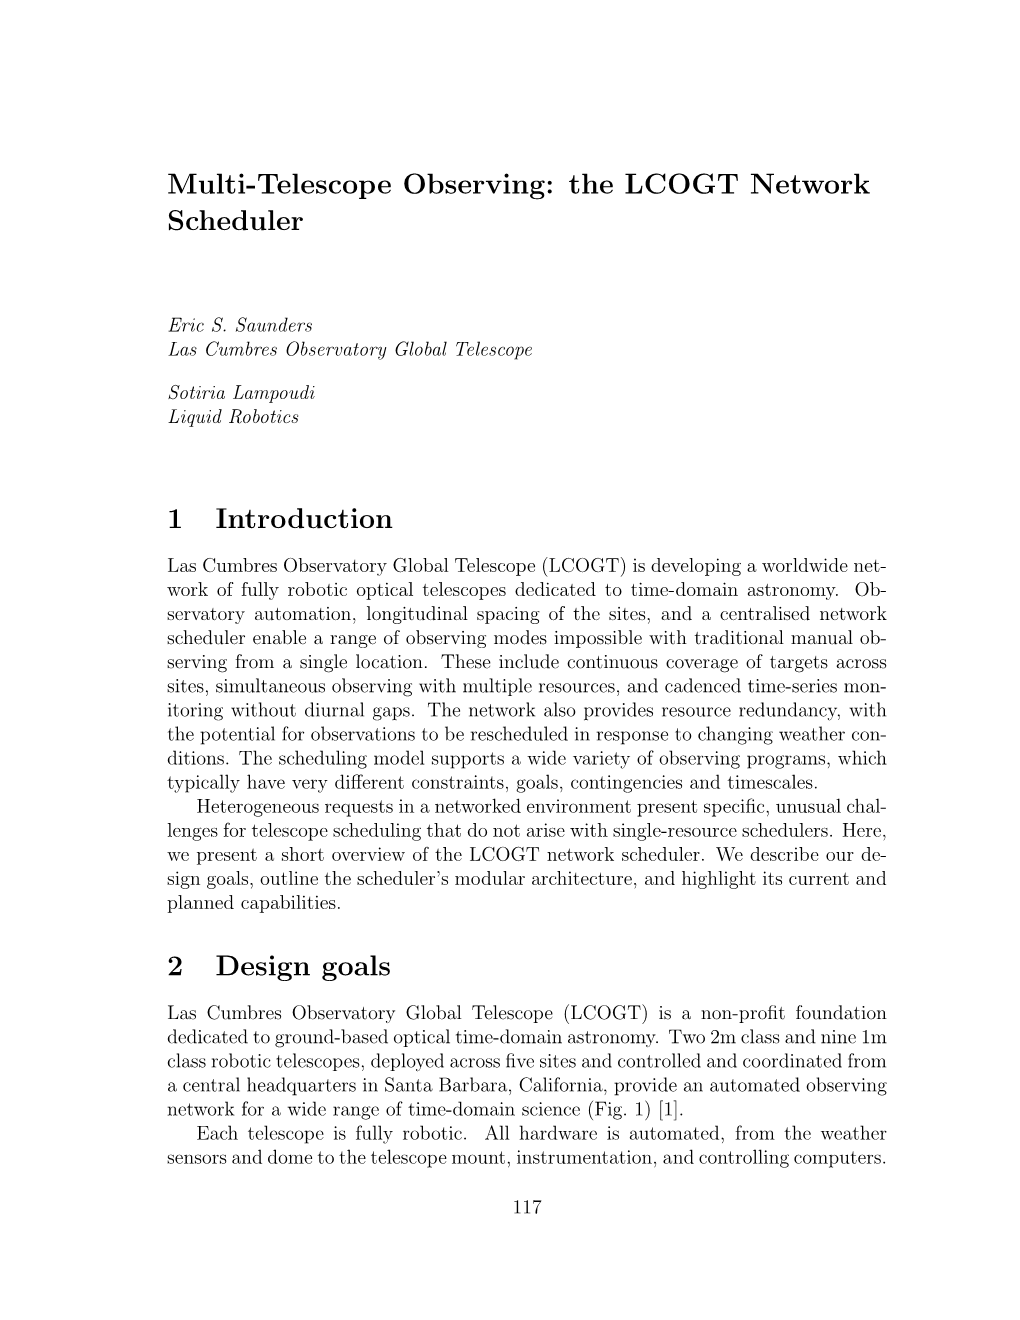 Multi-Telescope Observing: the LCOGT Network Scheduler 1